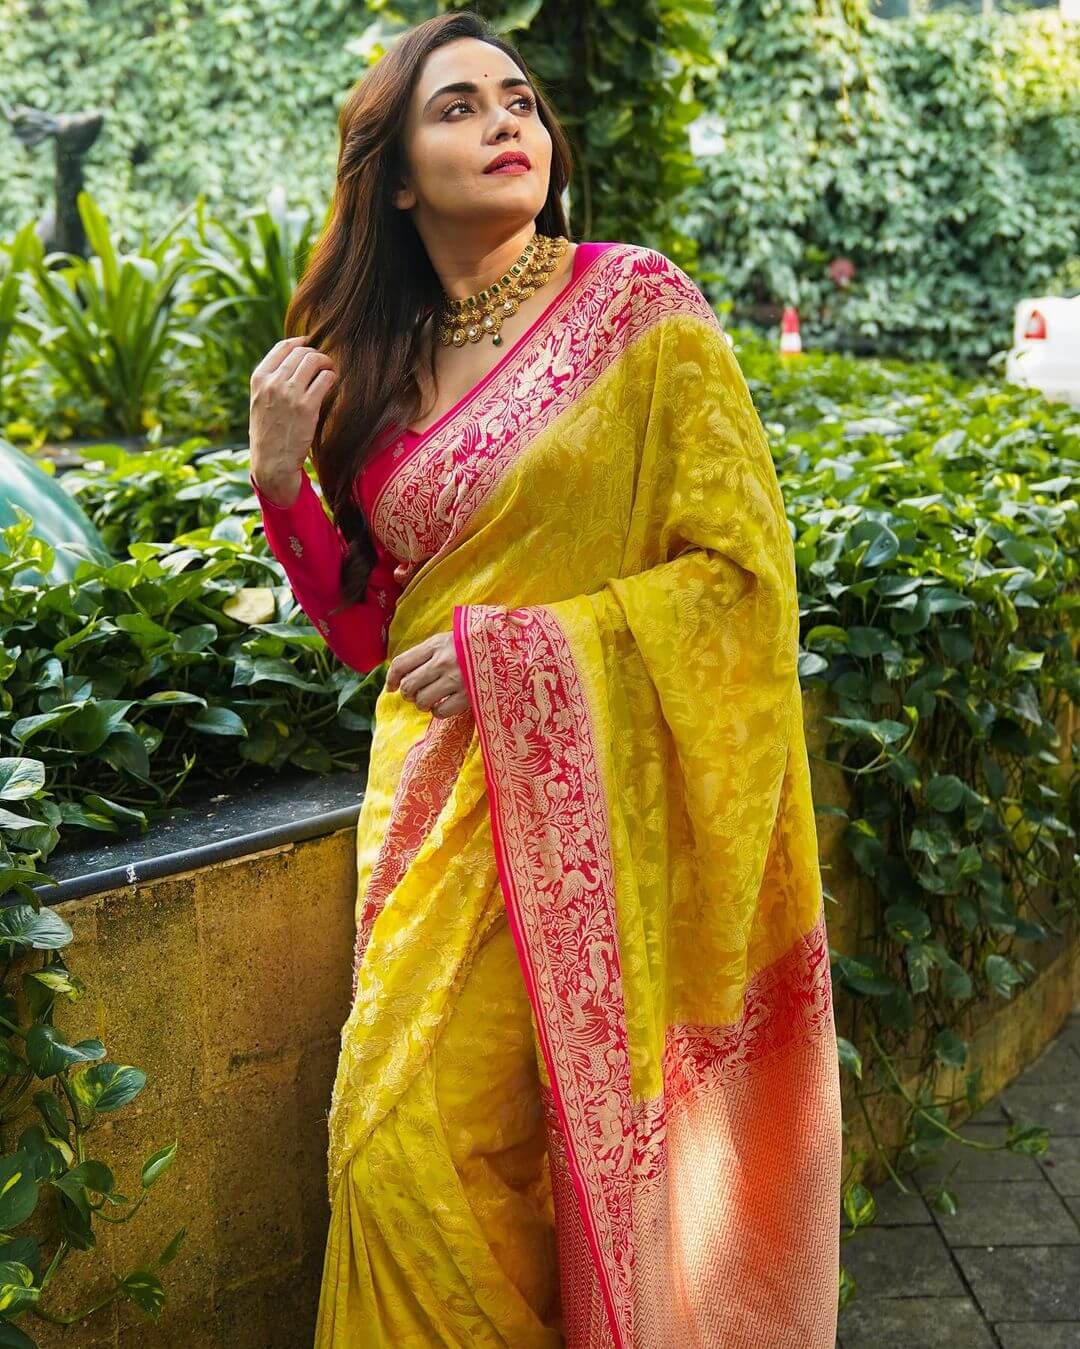 Amruta Khanvilkar In Pink And Yellow Saree With Matching Full Sleeves Blouse Amruta Khanvilkar Inspired Outfits, Fashion And Style